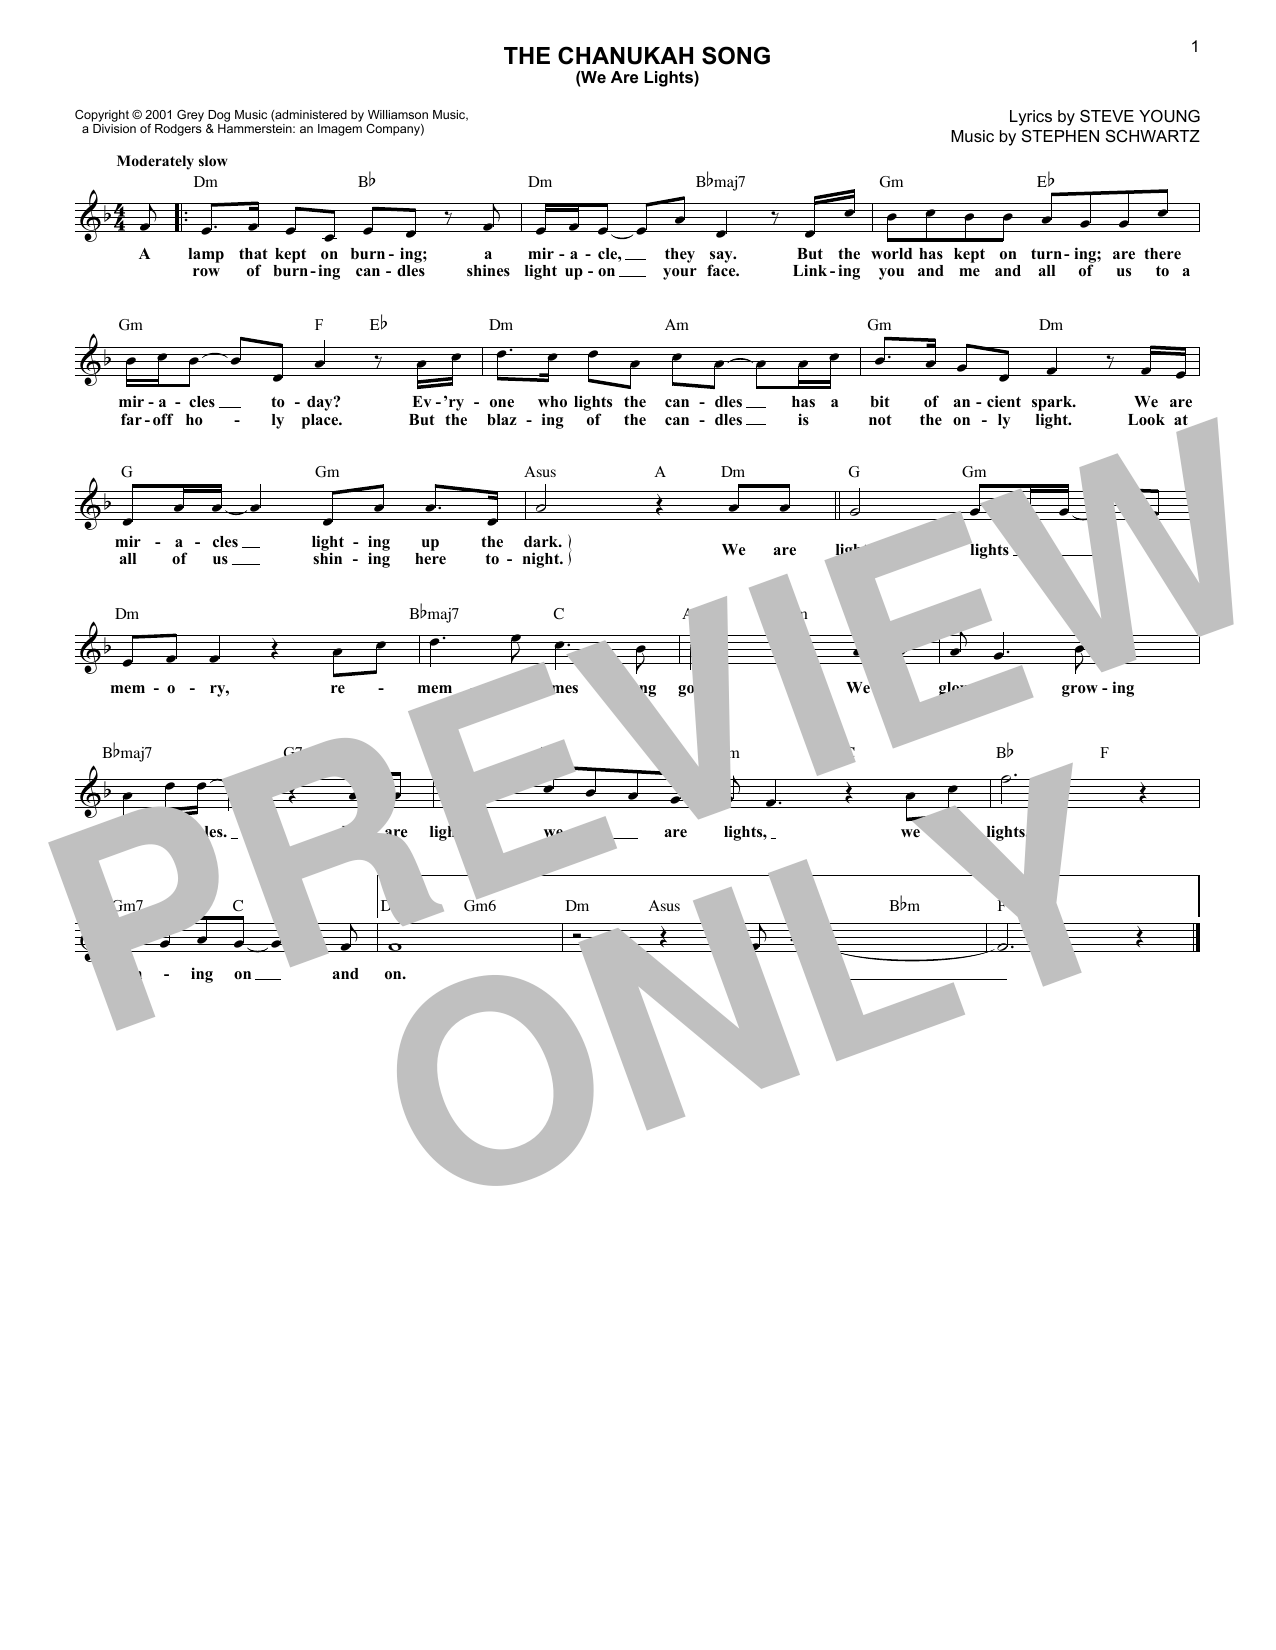 Download Steve Young The Chanukah Song (We Are Lights) Sheet Music